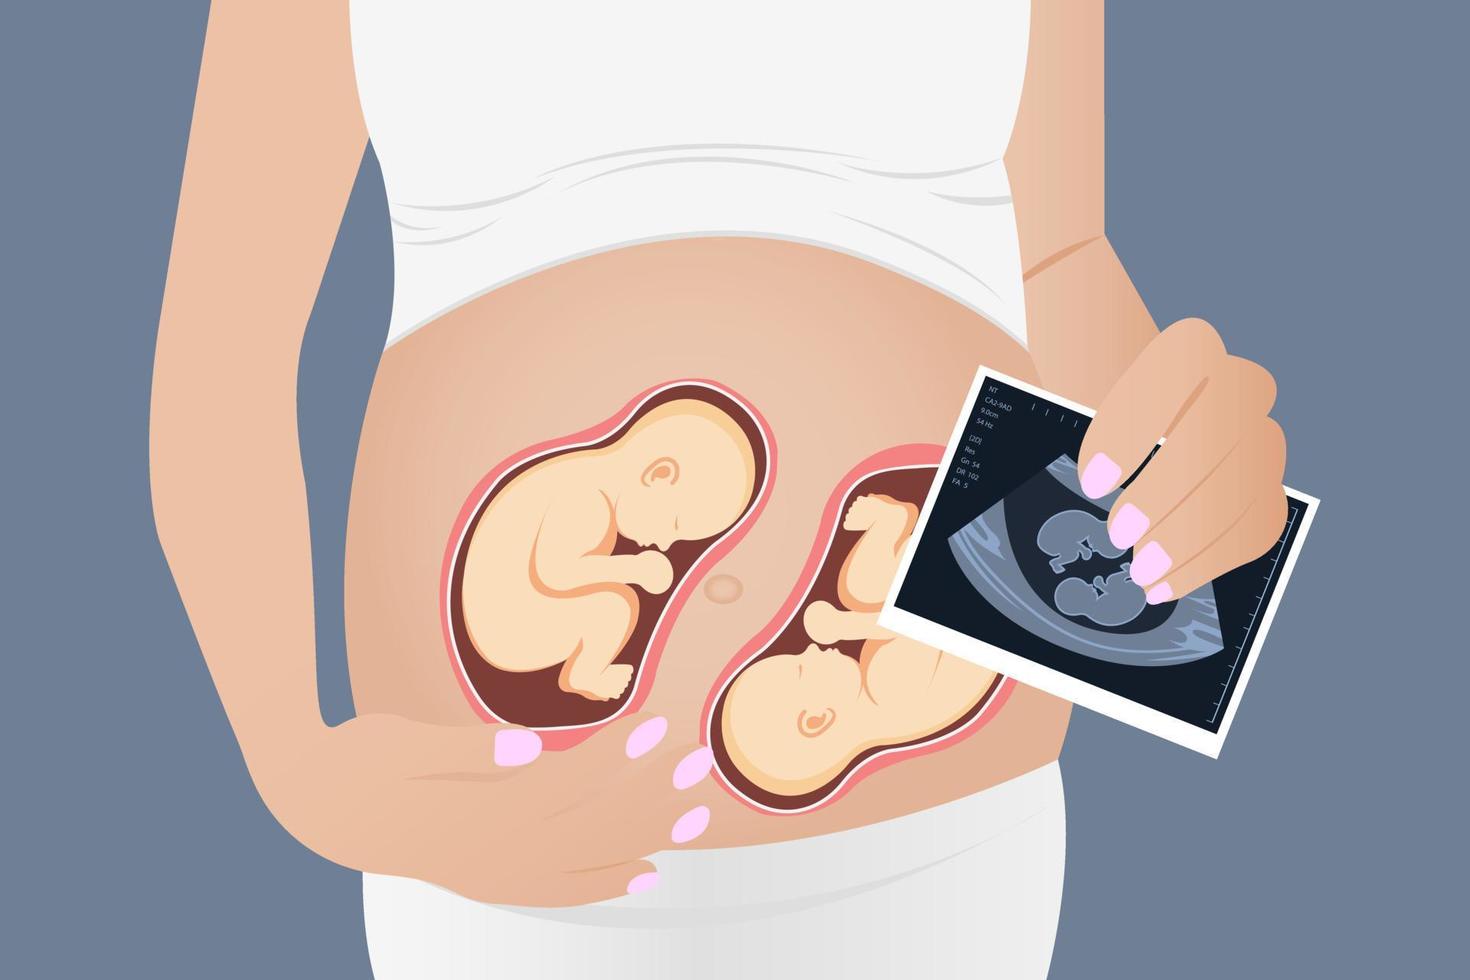 Pregnant woman with twins in the womb. Vector illustration